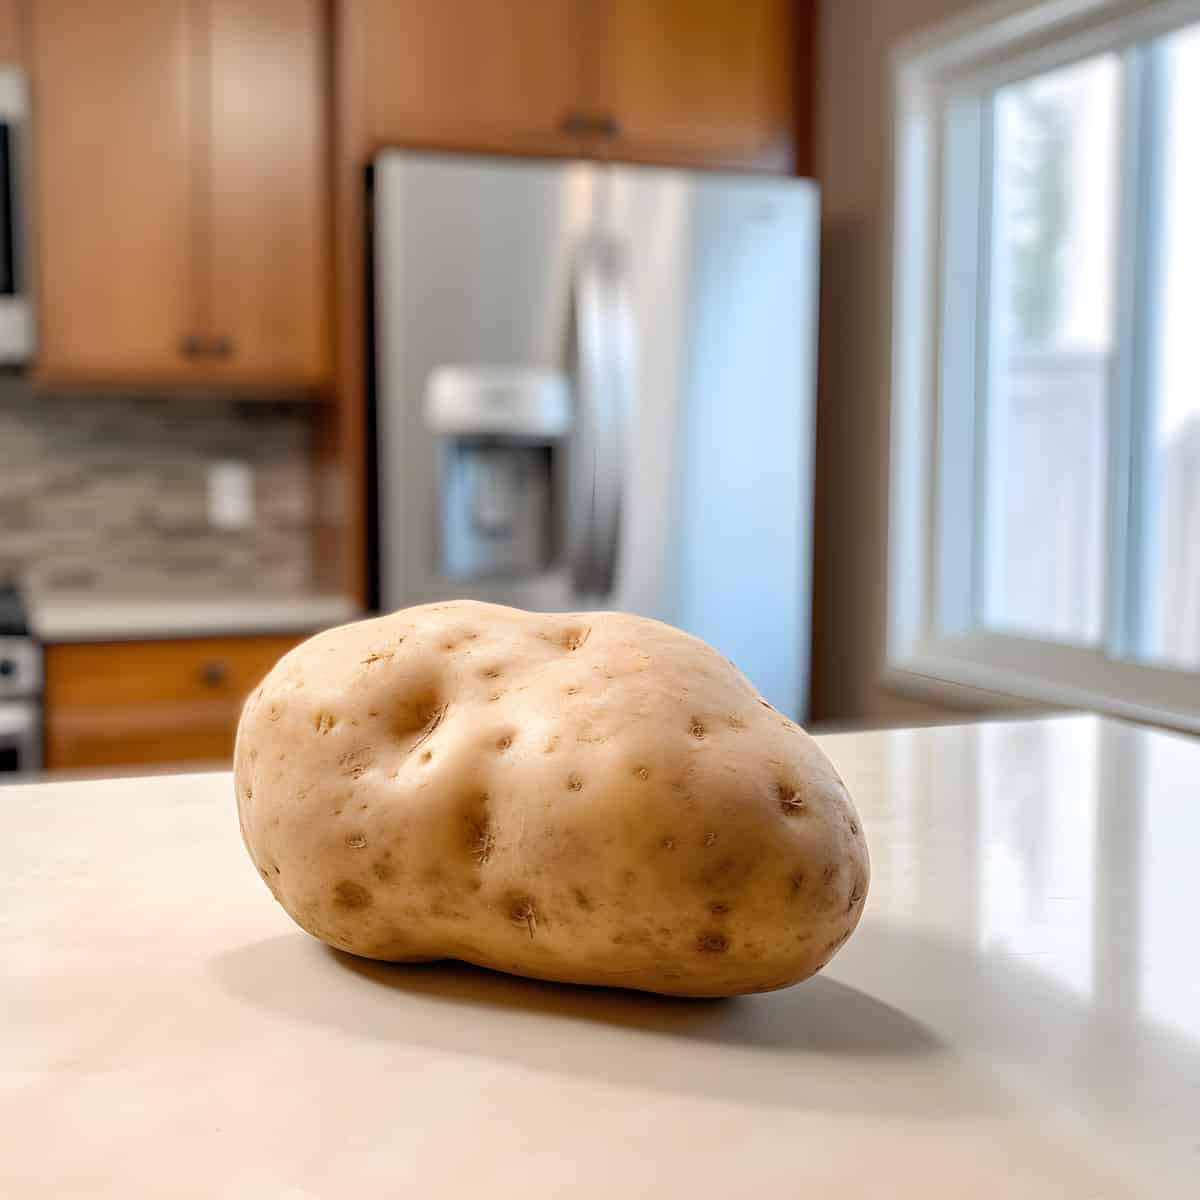 Butte Potatoes on a kitchen counter